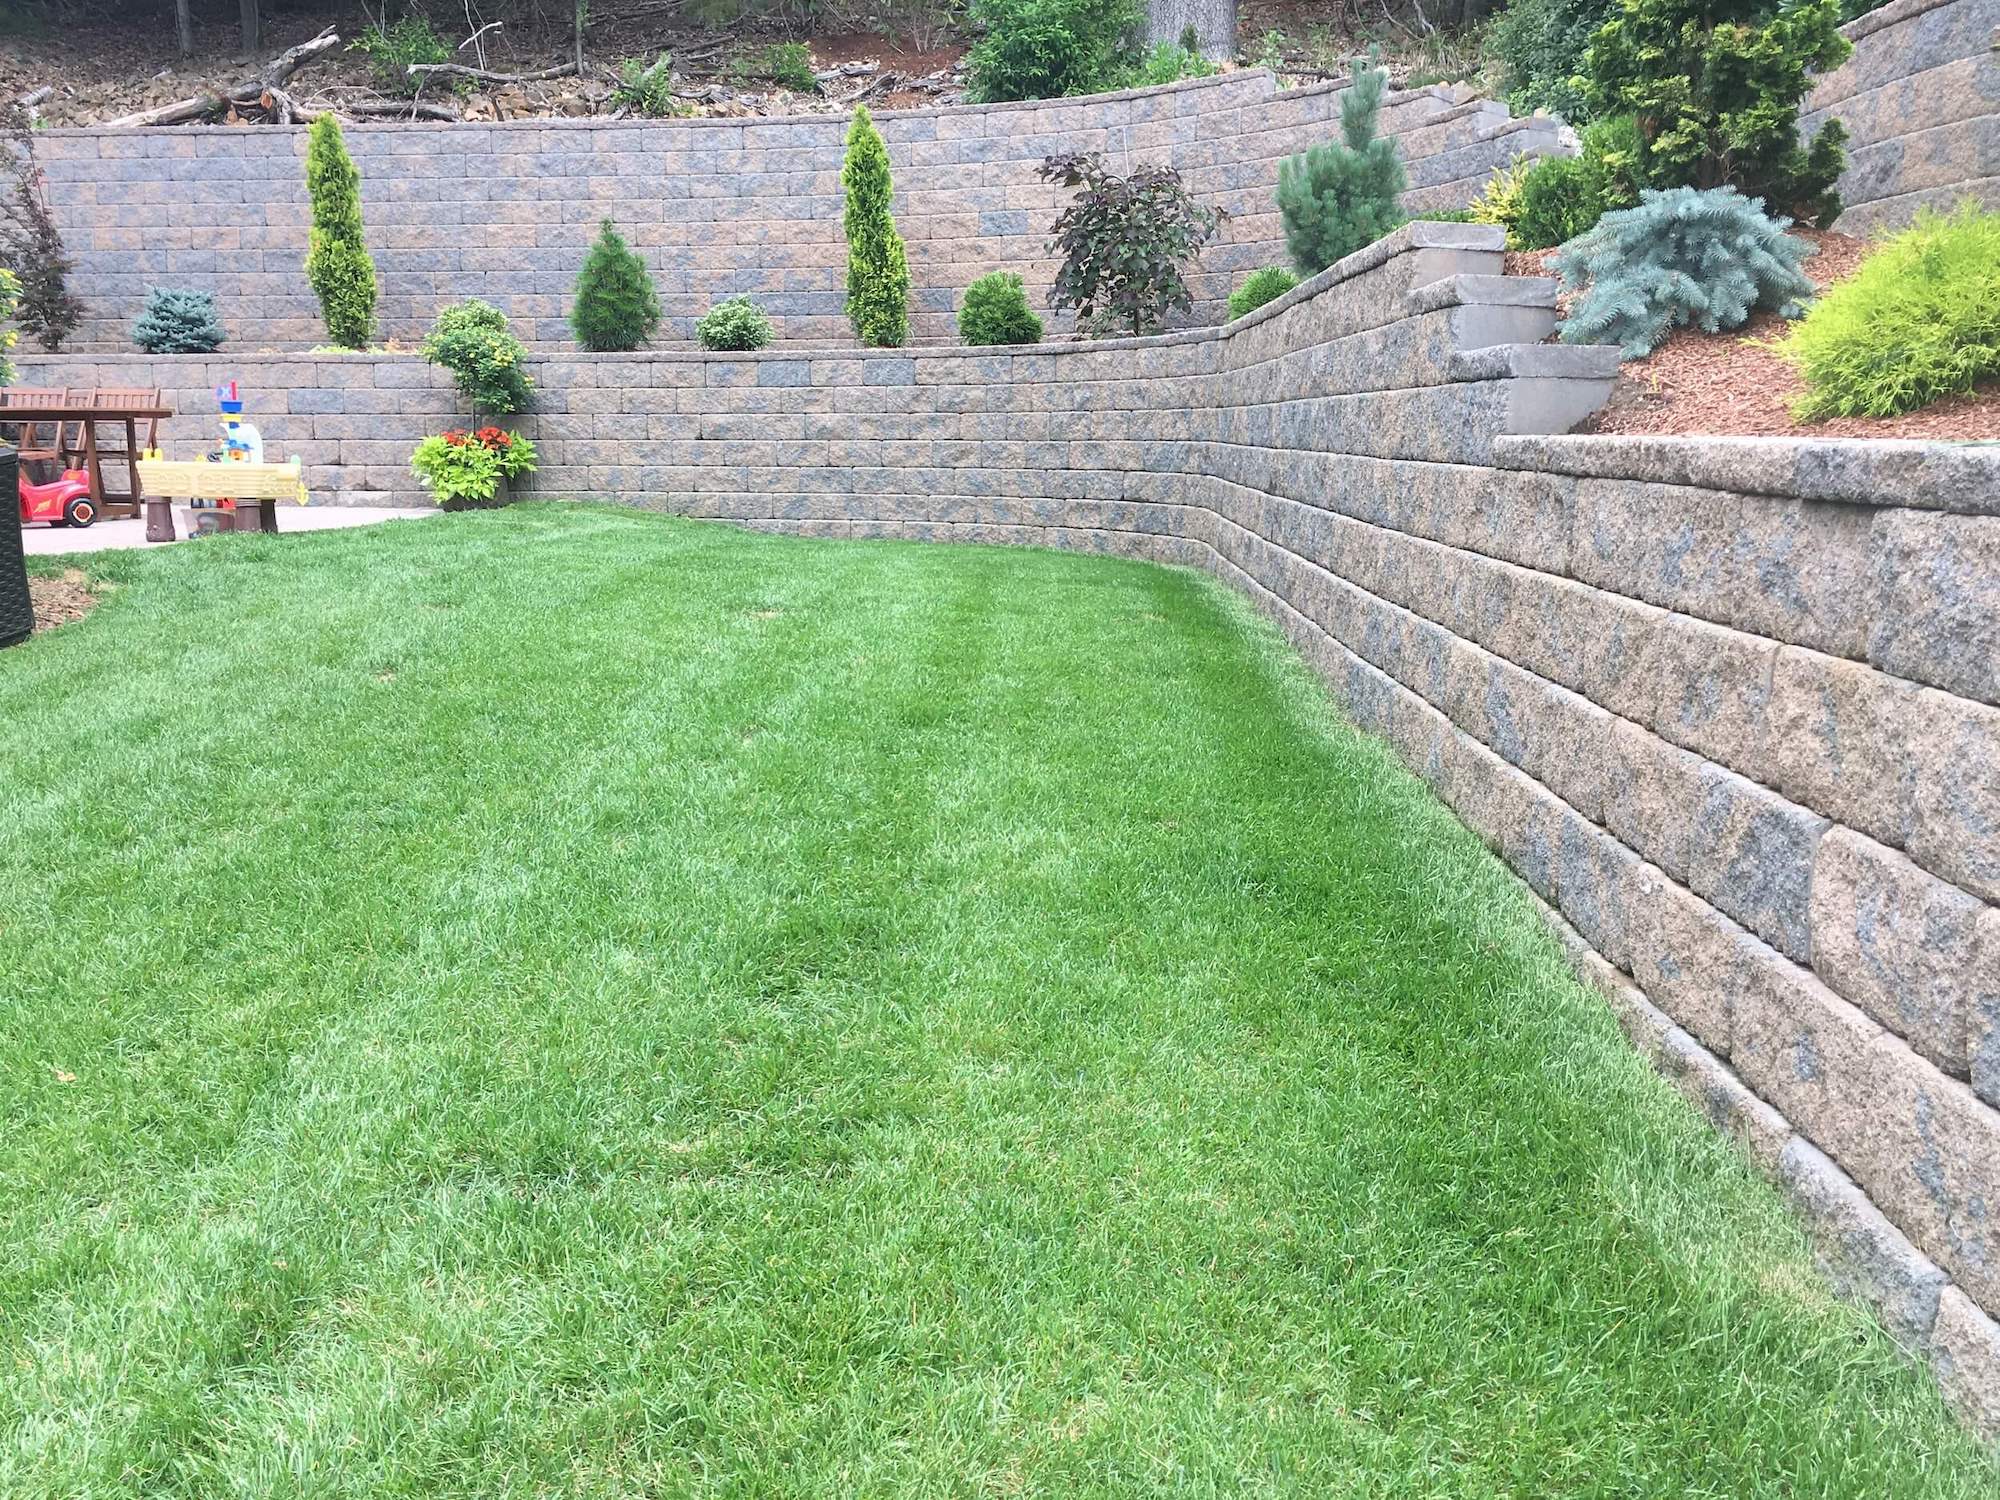 Retaining Walls Landscaping for Homes